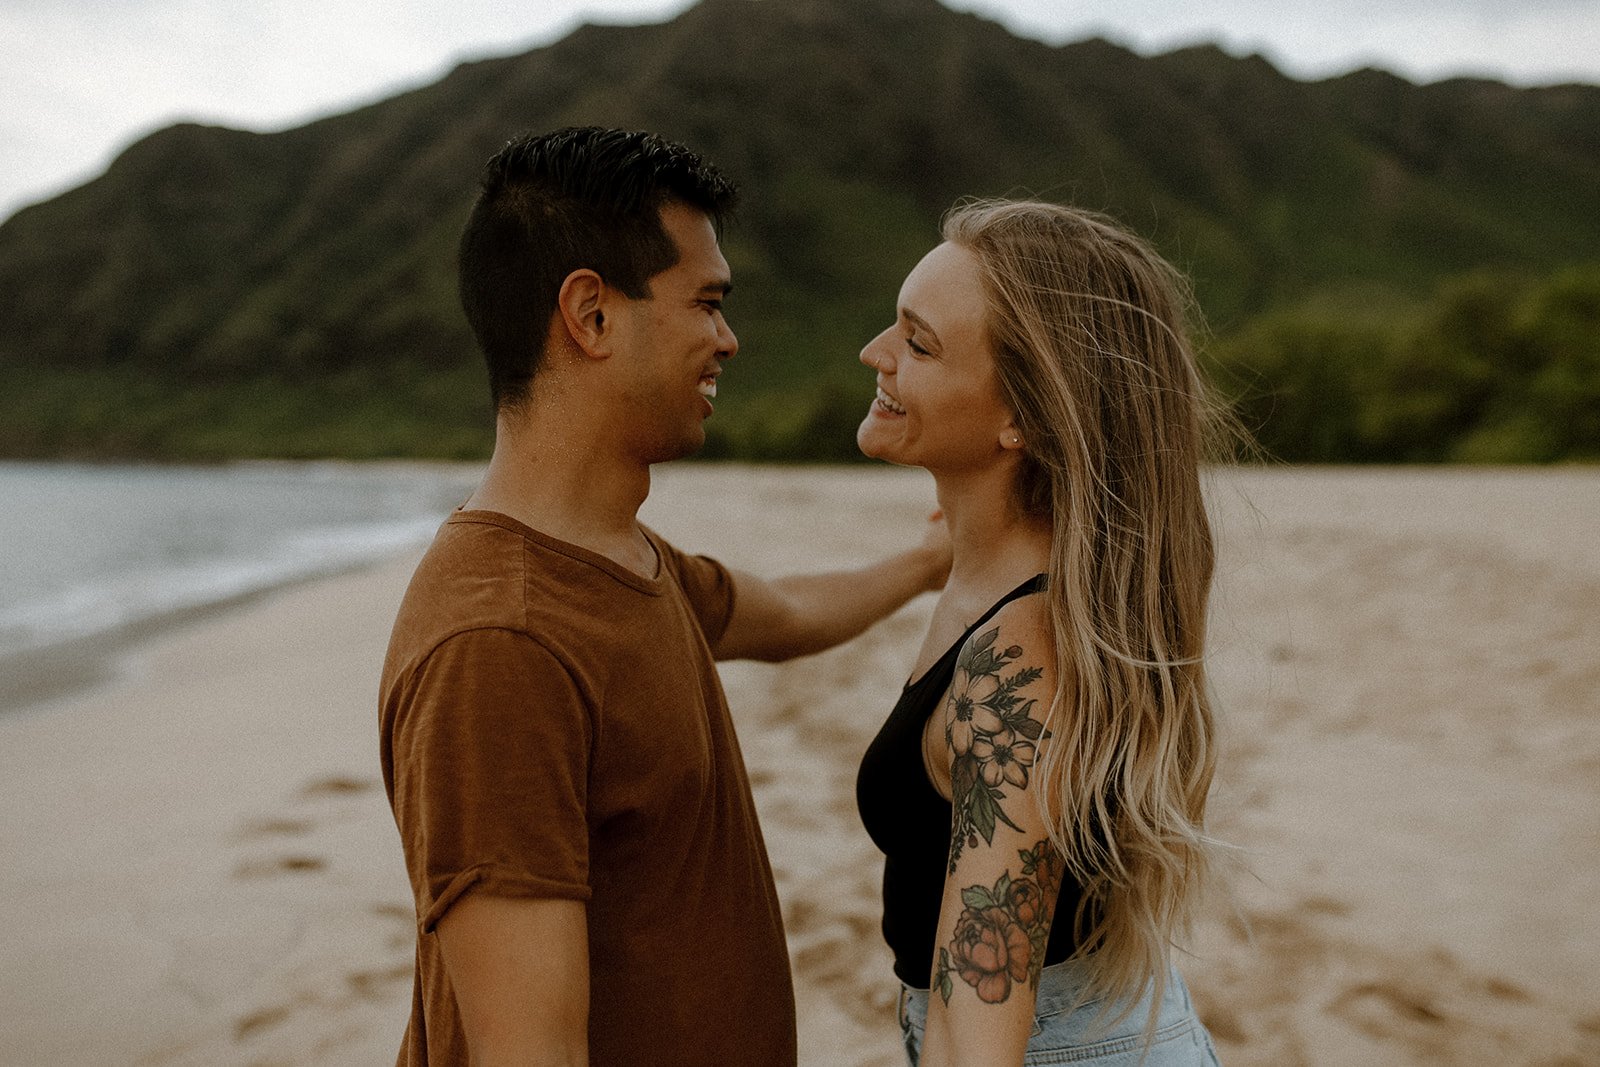 Hayley and Christian's couples session at Makua Beach in Oahu, Hawaii